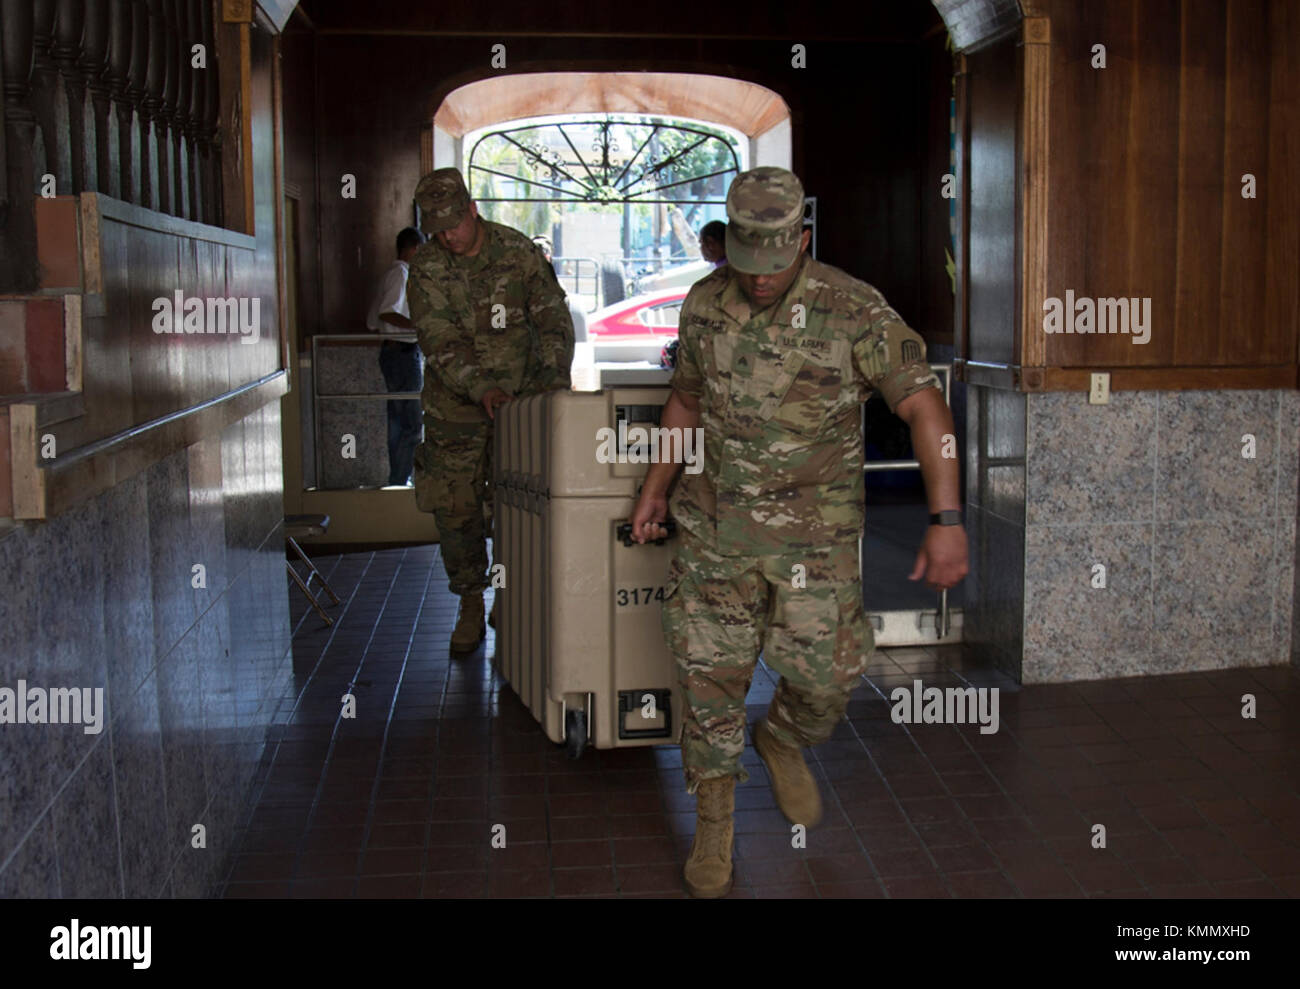 SAN JUAN, Puerto Rico – Army Sgt. Russell Comeaux, a nodal network systems operator-maintainer, and Pfc. Issac Benavidez, an information technology specialist, carry a satellite communications system into the military police headquarters in Vieques, Puerto Rico on Dec. 1, 2017.  Soldiers brought the system to the island to enhance communications between Army units stationed on Vieques and those back on mainland Puerto Rico.  (U.S. Army Stock Photo